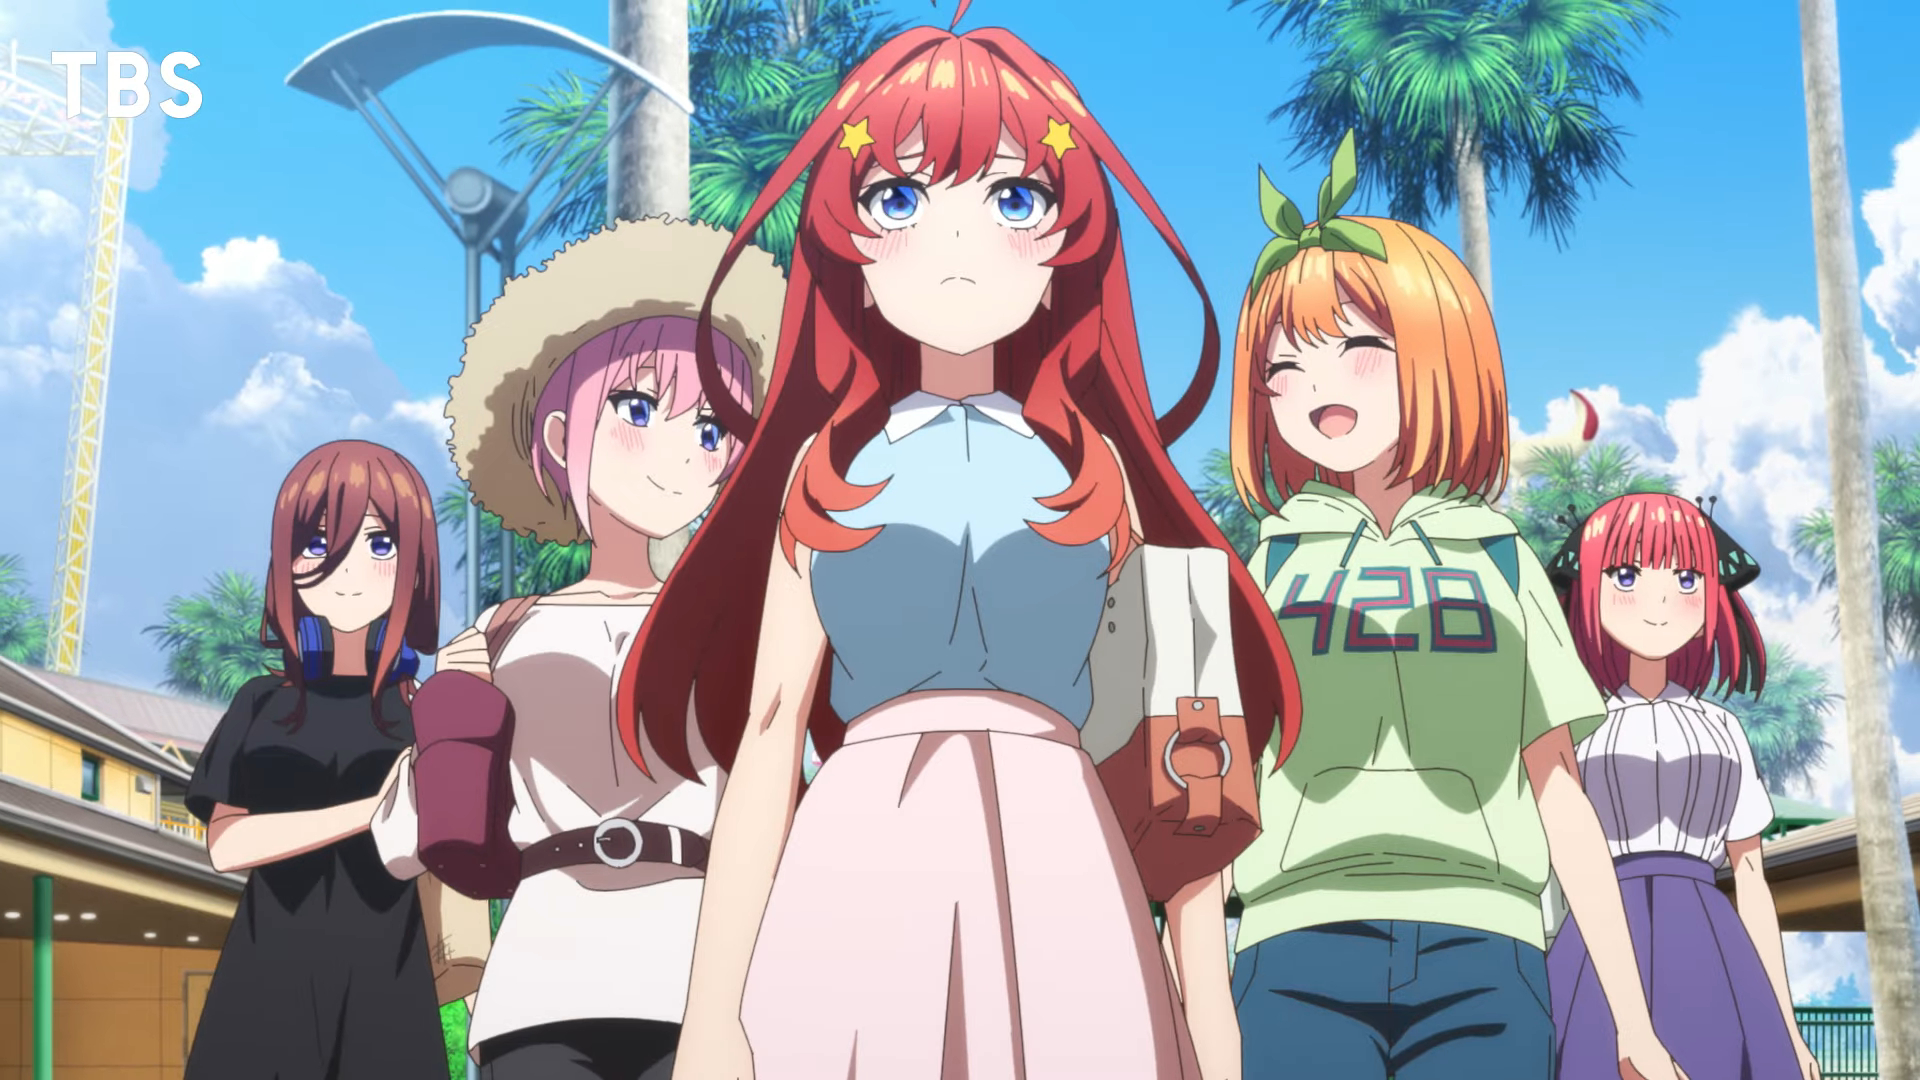 New Quintessential Quintuplets Anime by Shaft Gets Trailer - Anime Corner